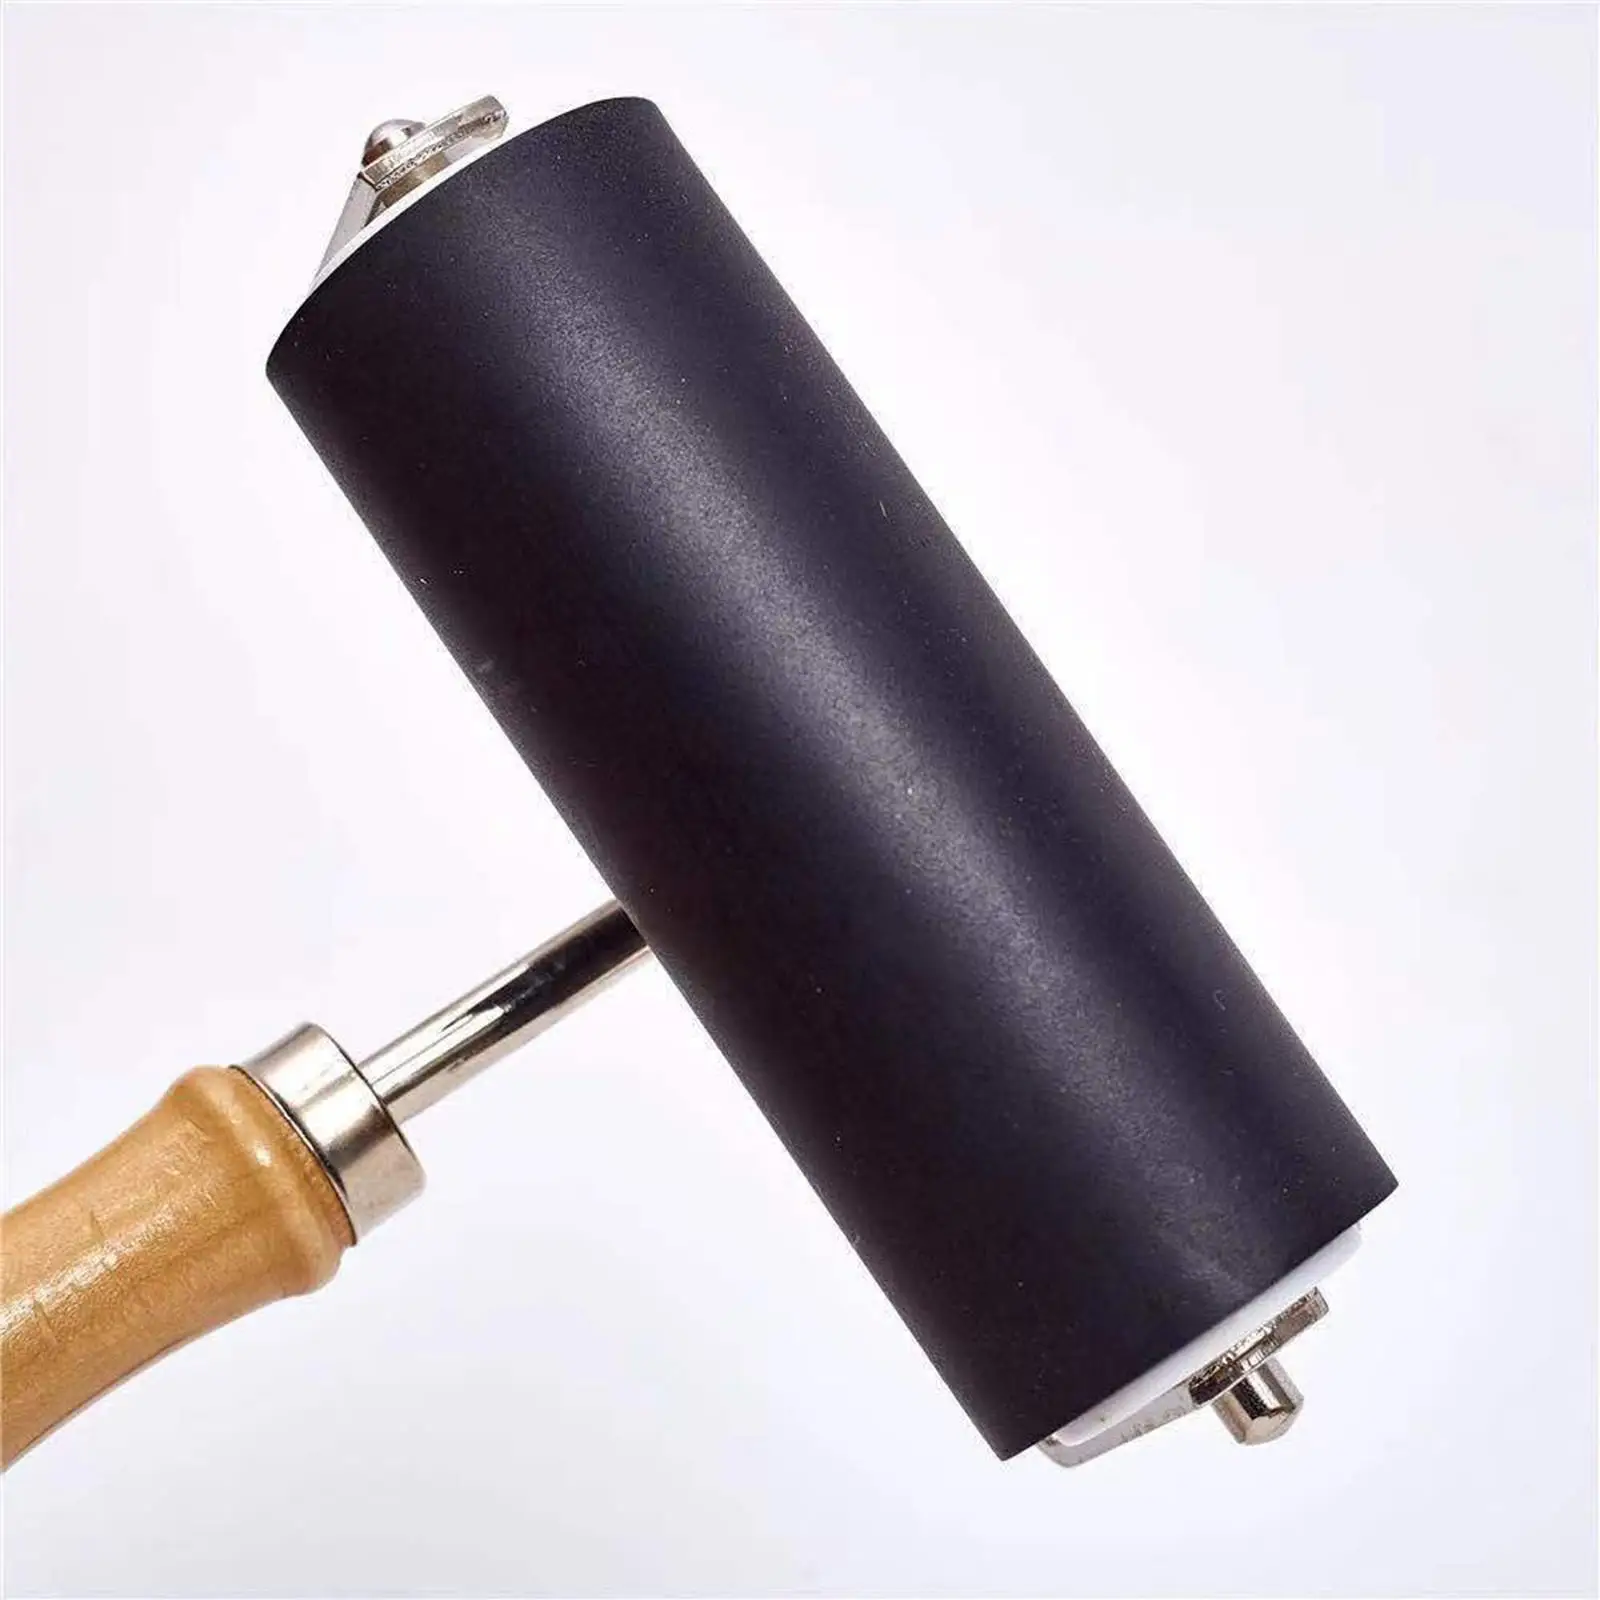 4 Inch Rubber Roller for Printmaking, Printing, Oil Painting,Stamping